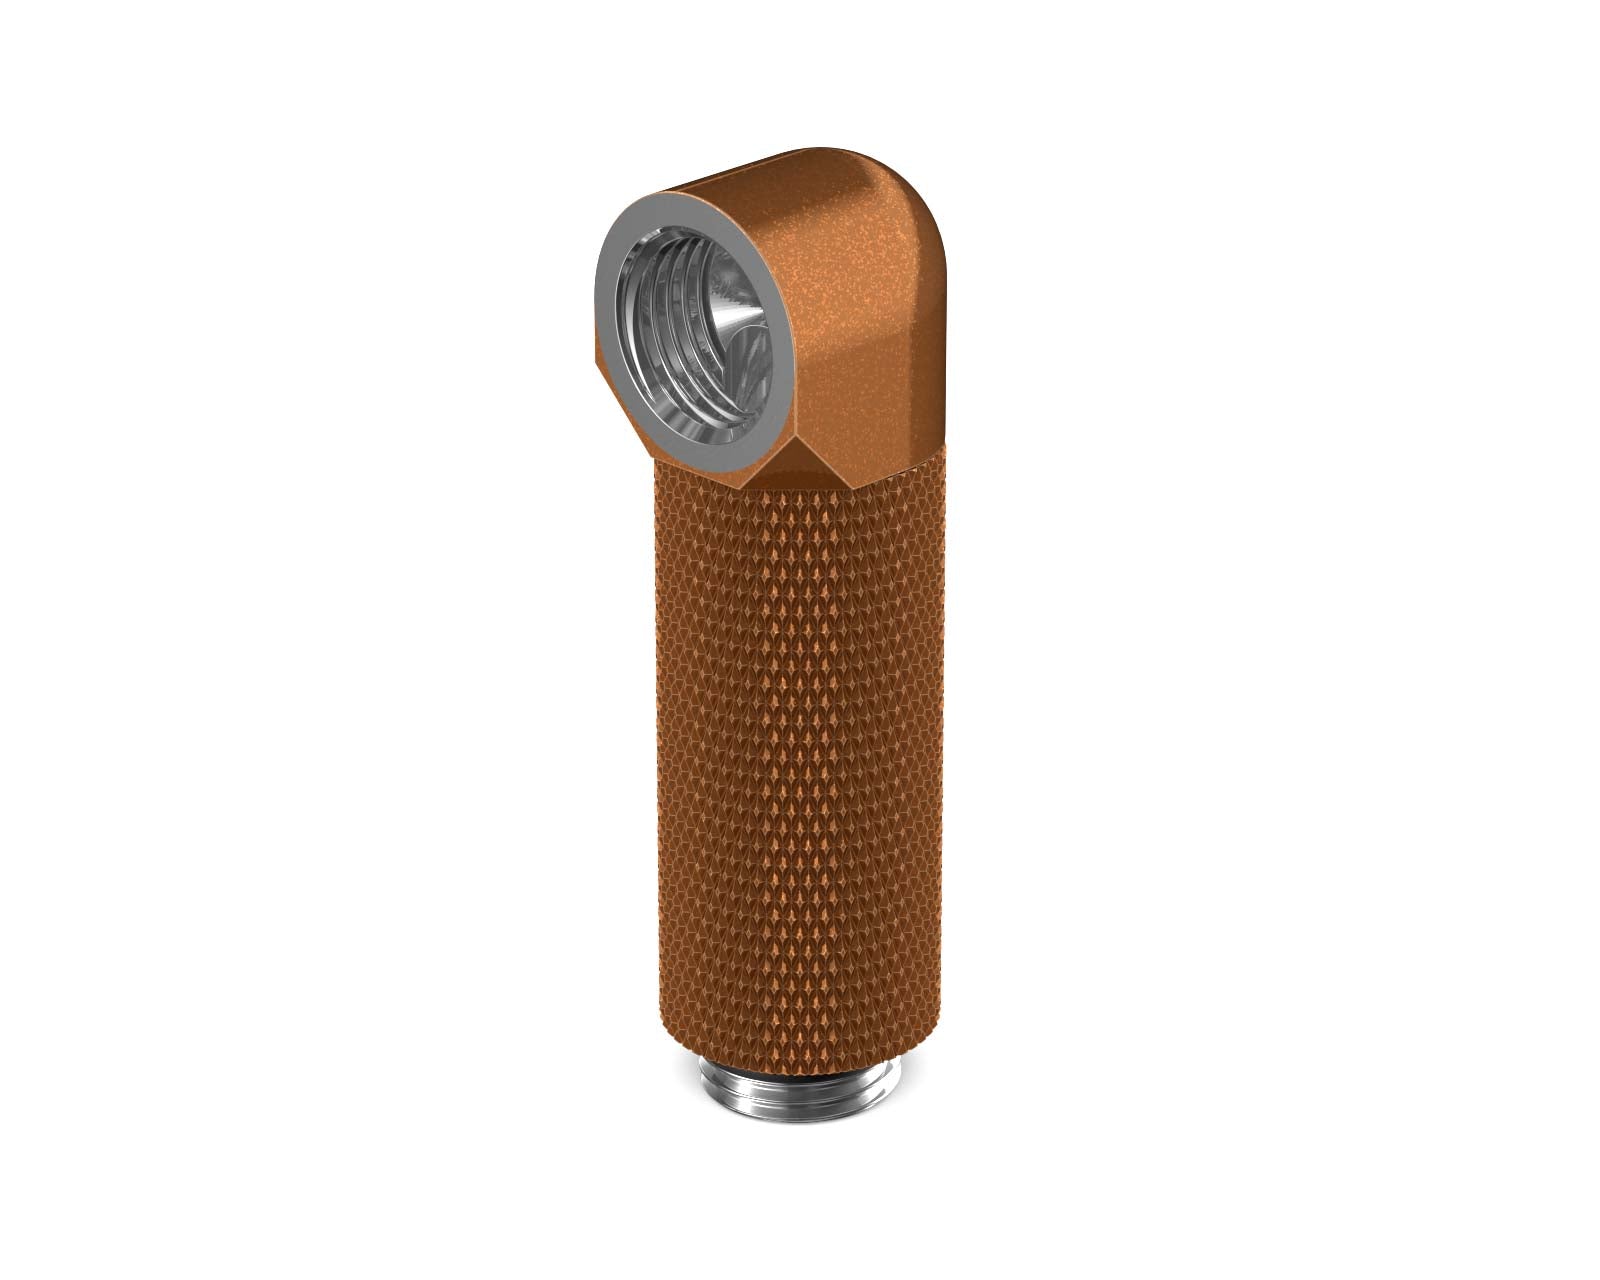 PrimoChill Male to Female G 1/4in. 90 Degree SX Rotary 40mm Extension Elbow Fitting - PrimoChill - KEEPING IT COOL Copper